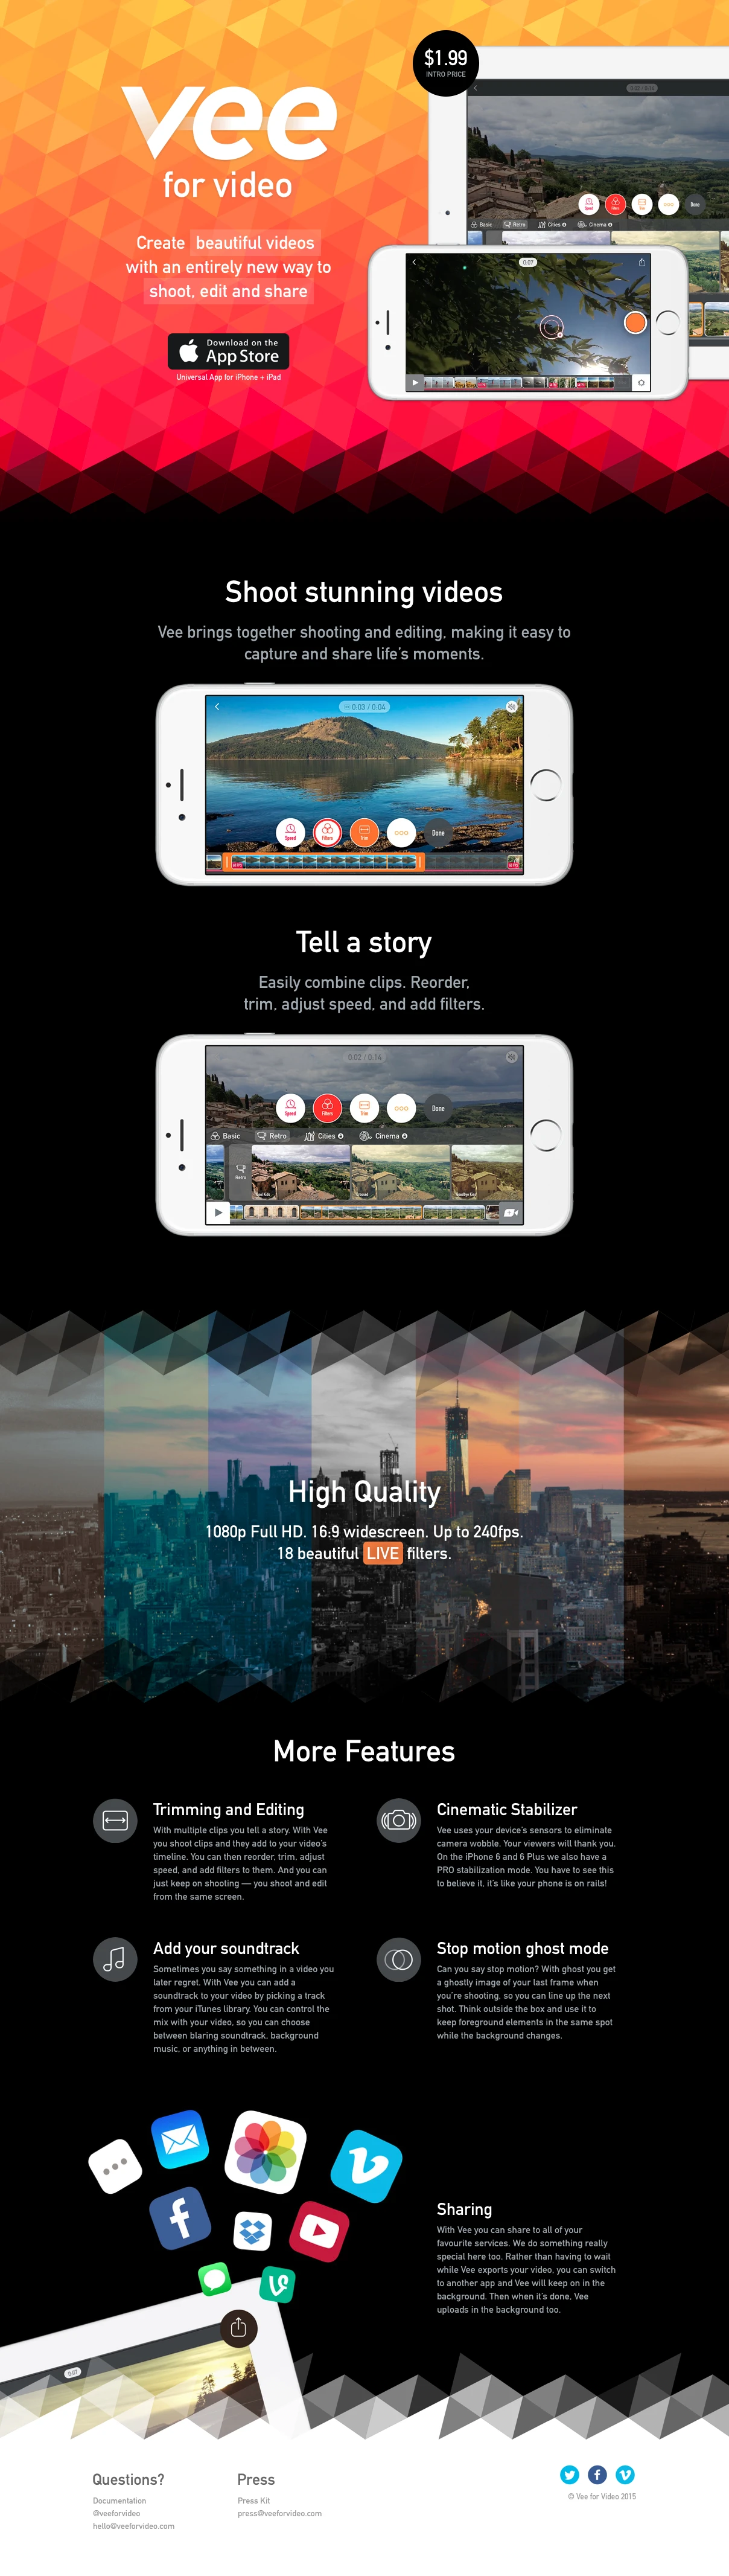 Vee For Video Landing Page Example: Vee helps you create beautiful videos with an entirely new way to shoot, edit and share. Combine your clips together with high quality filters into stories you'll love to share.